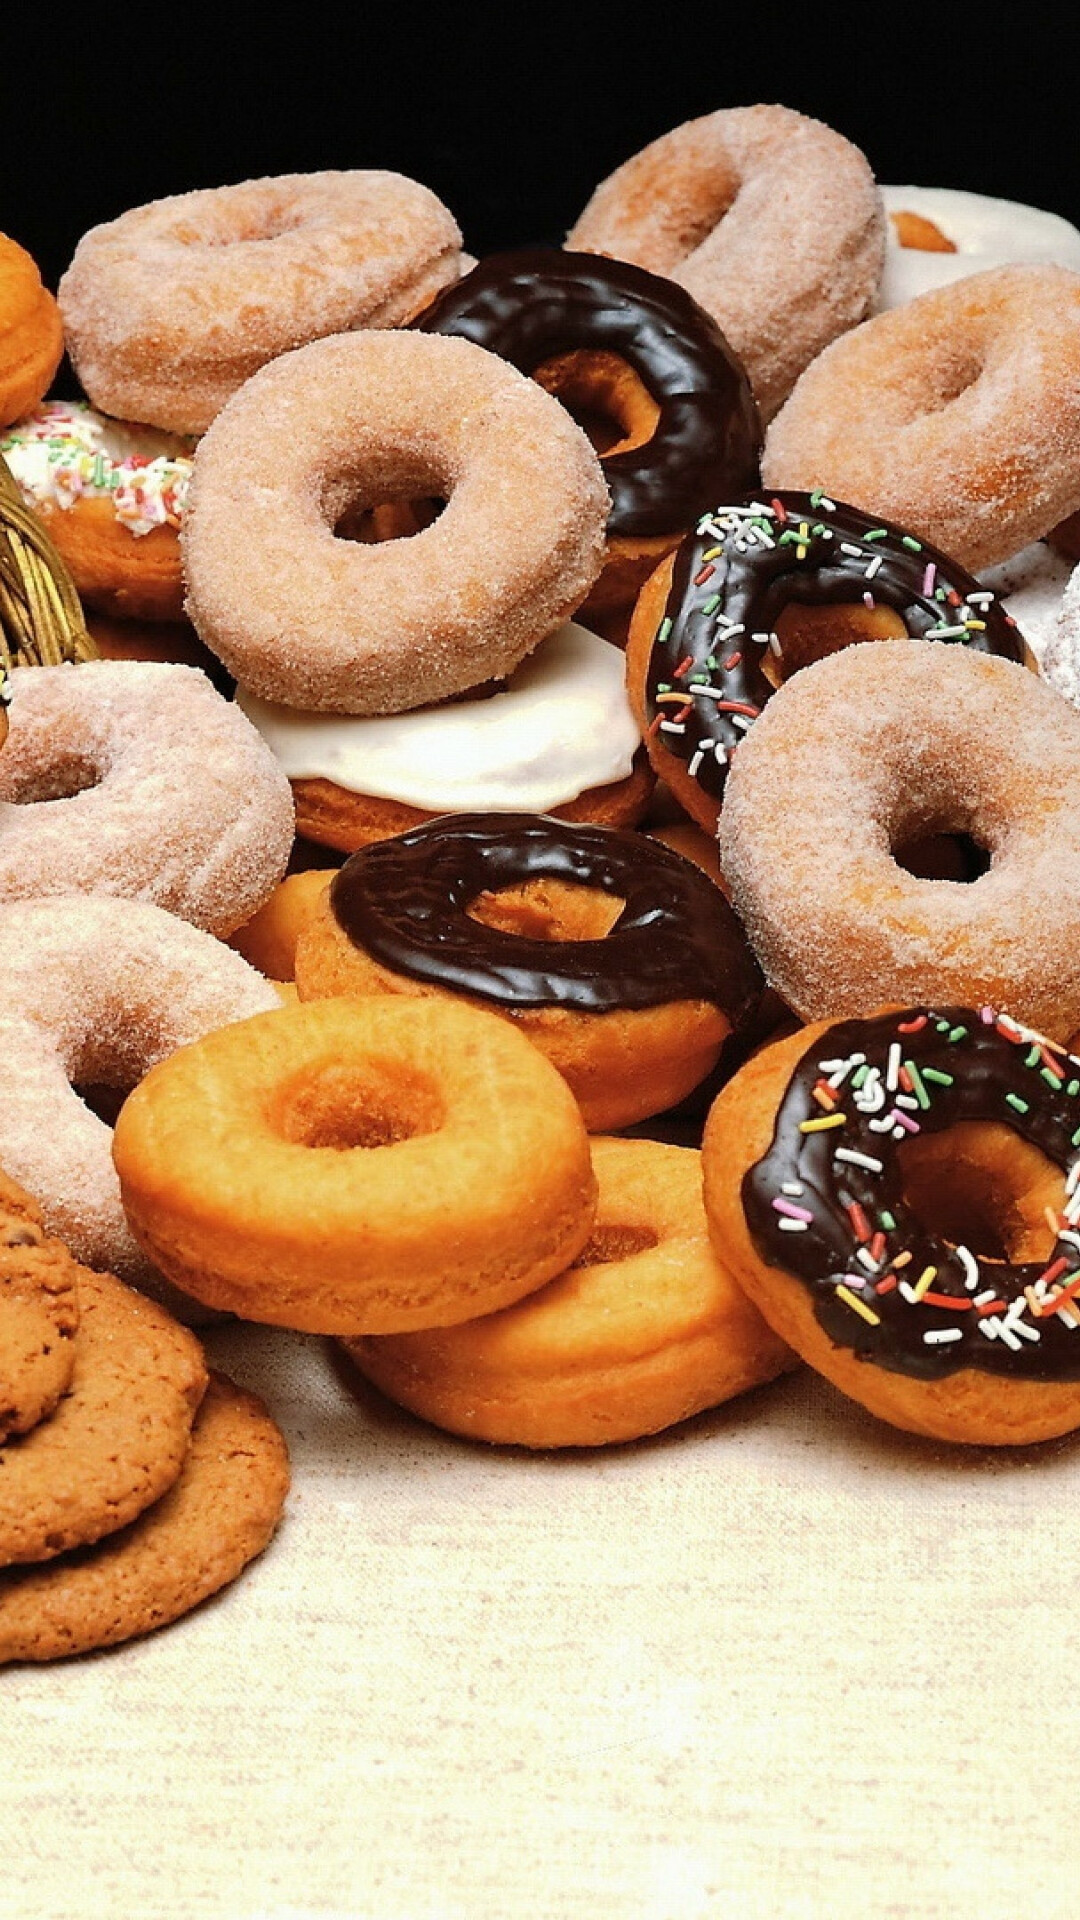 Sweets: Doughnuts, Ring-shaped snack food popular in many countries. 1080x1920 Full HD Background.